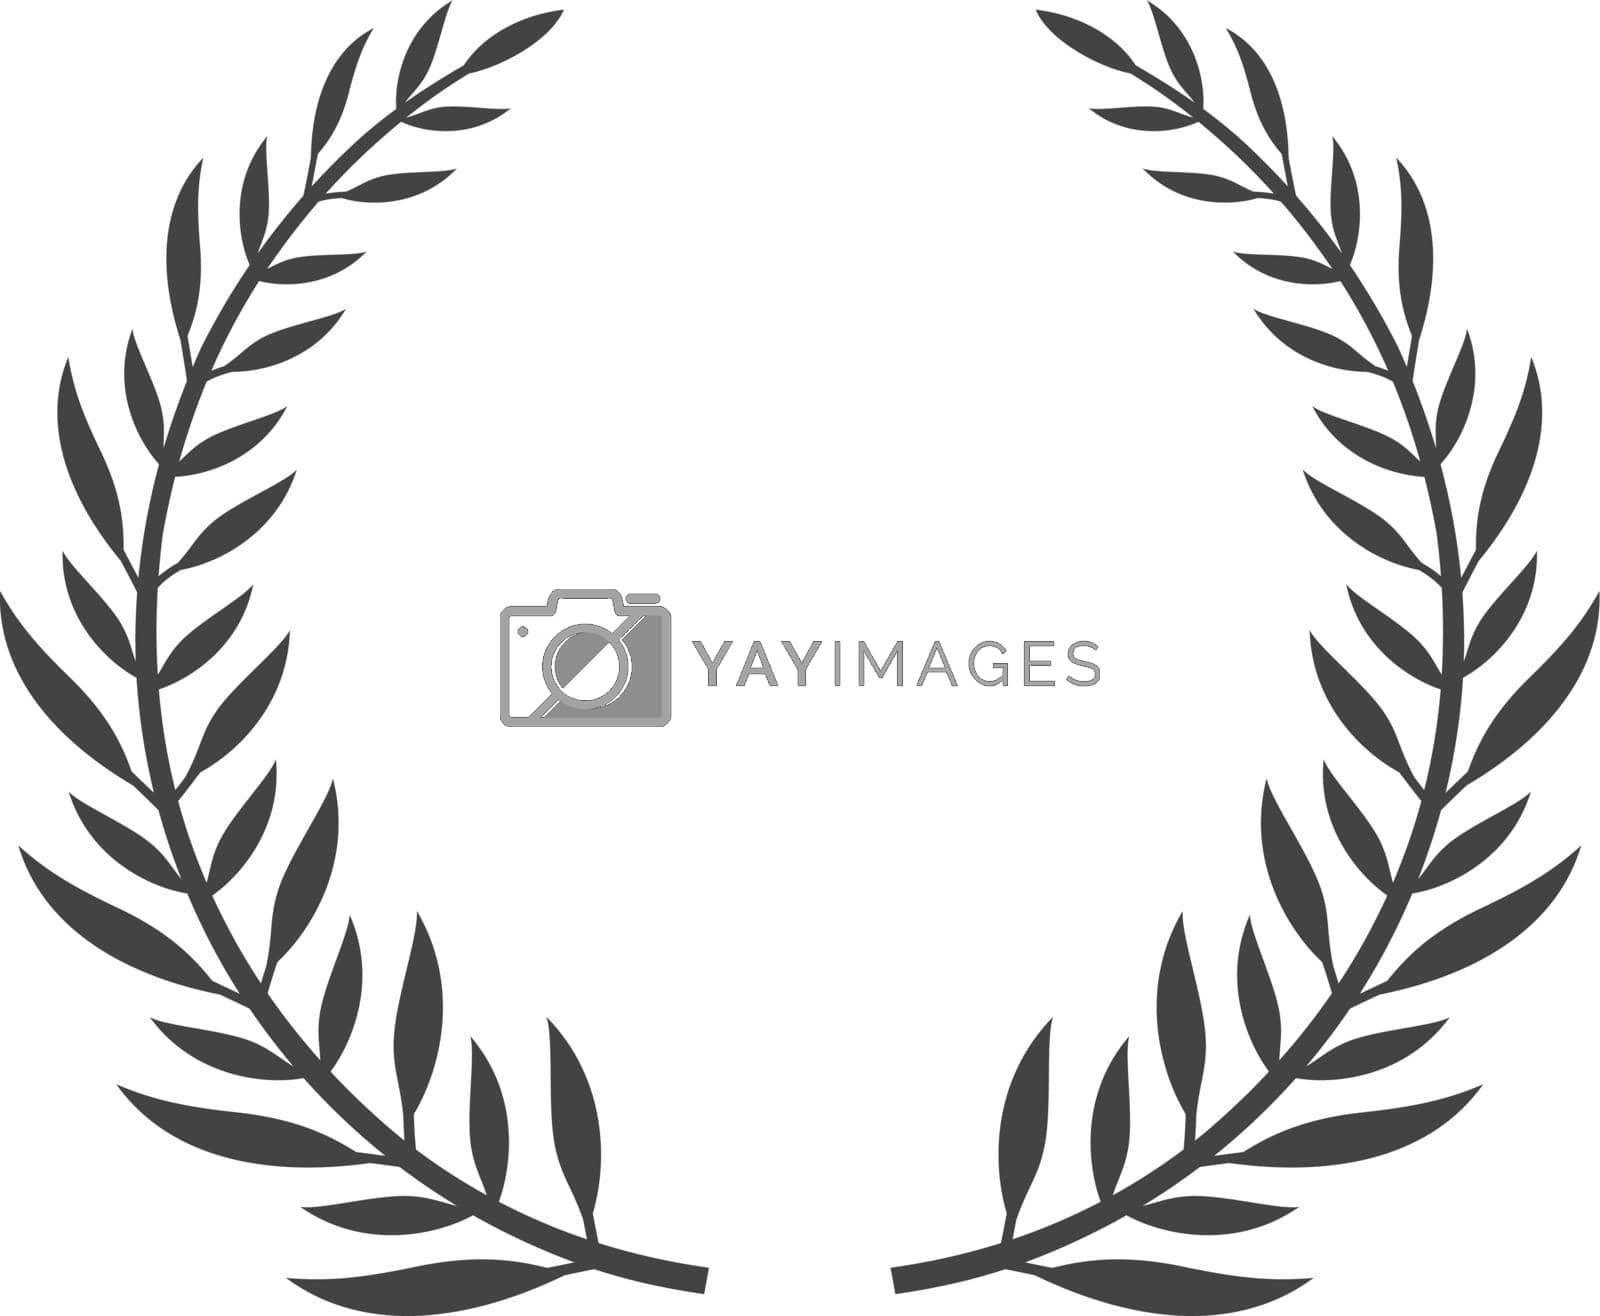 Royalty free image of Classic Greek wreath. Heraldic wreaths classic style painting graphic by LadadikArt